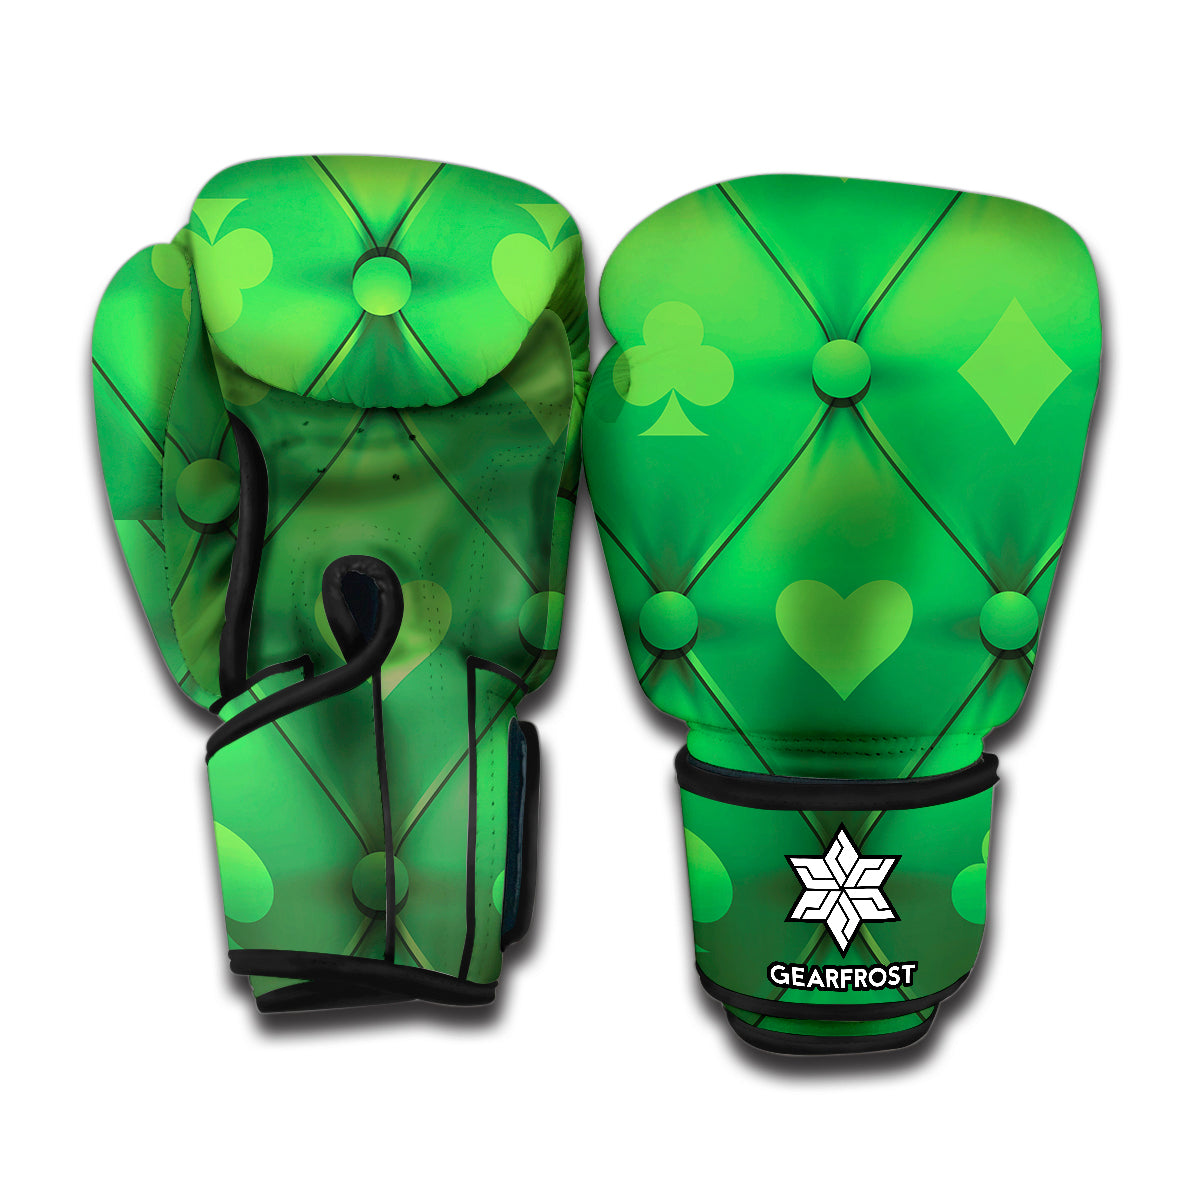 Green Playing Card Suits Pattern Print Boxing Gloves